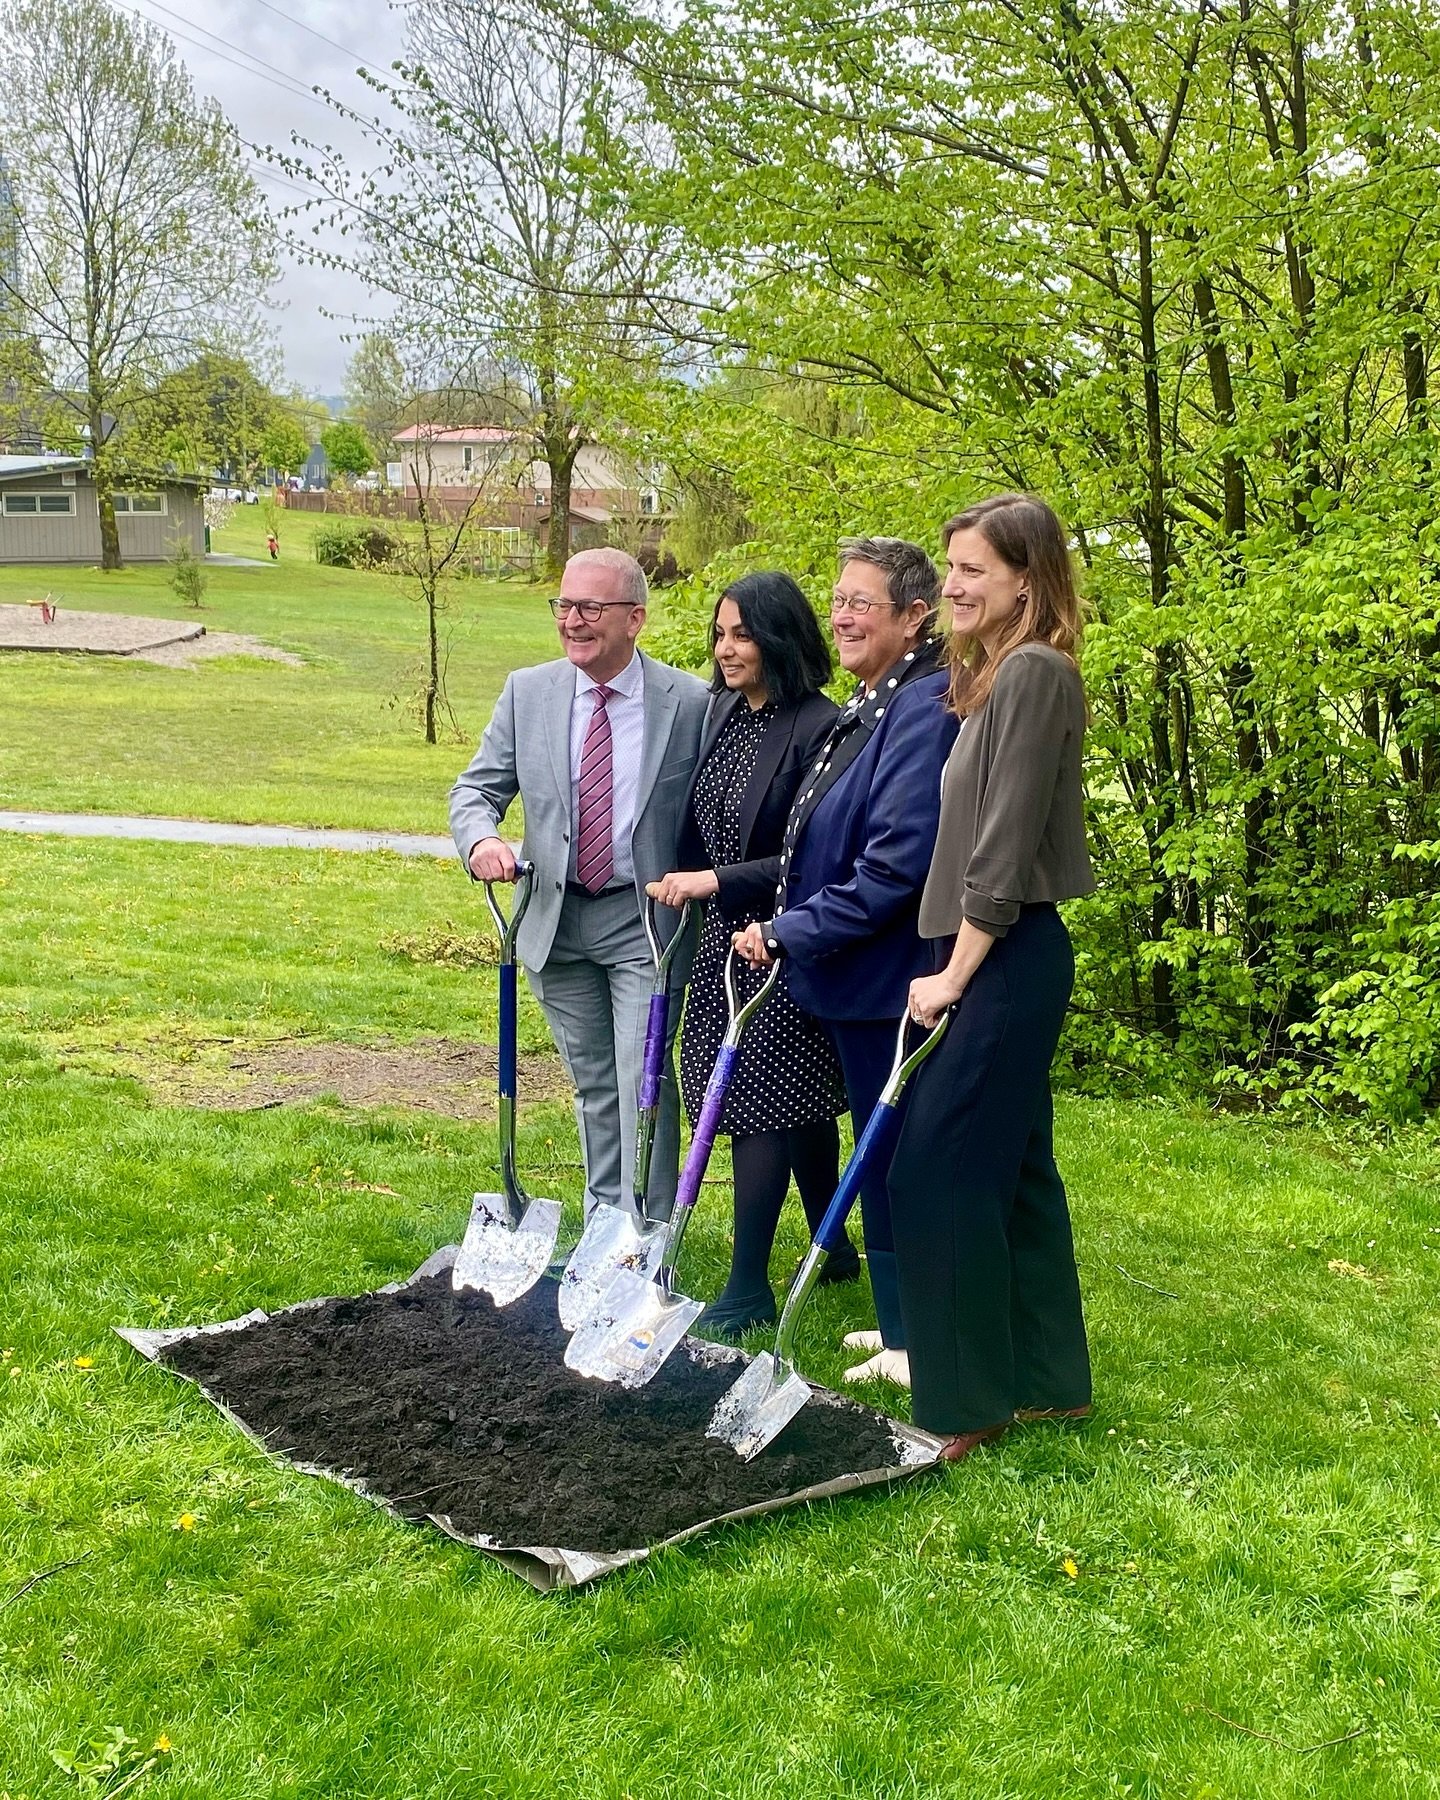 We were happy to support our long-time client The Kettle Society as they broke ground on a new transition home for women. The ceremony, which featured speeches from representatives from The Kettle as well as B.C.&rsquo;s Attorney General, Niki Sharma